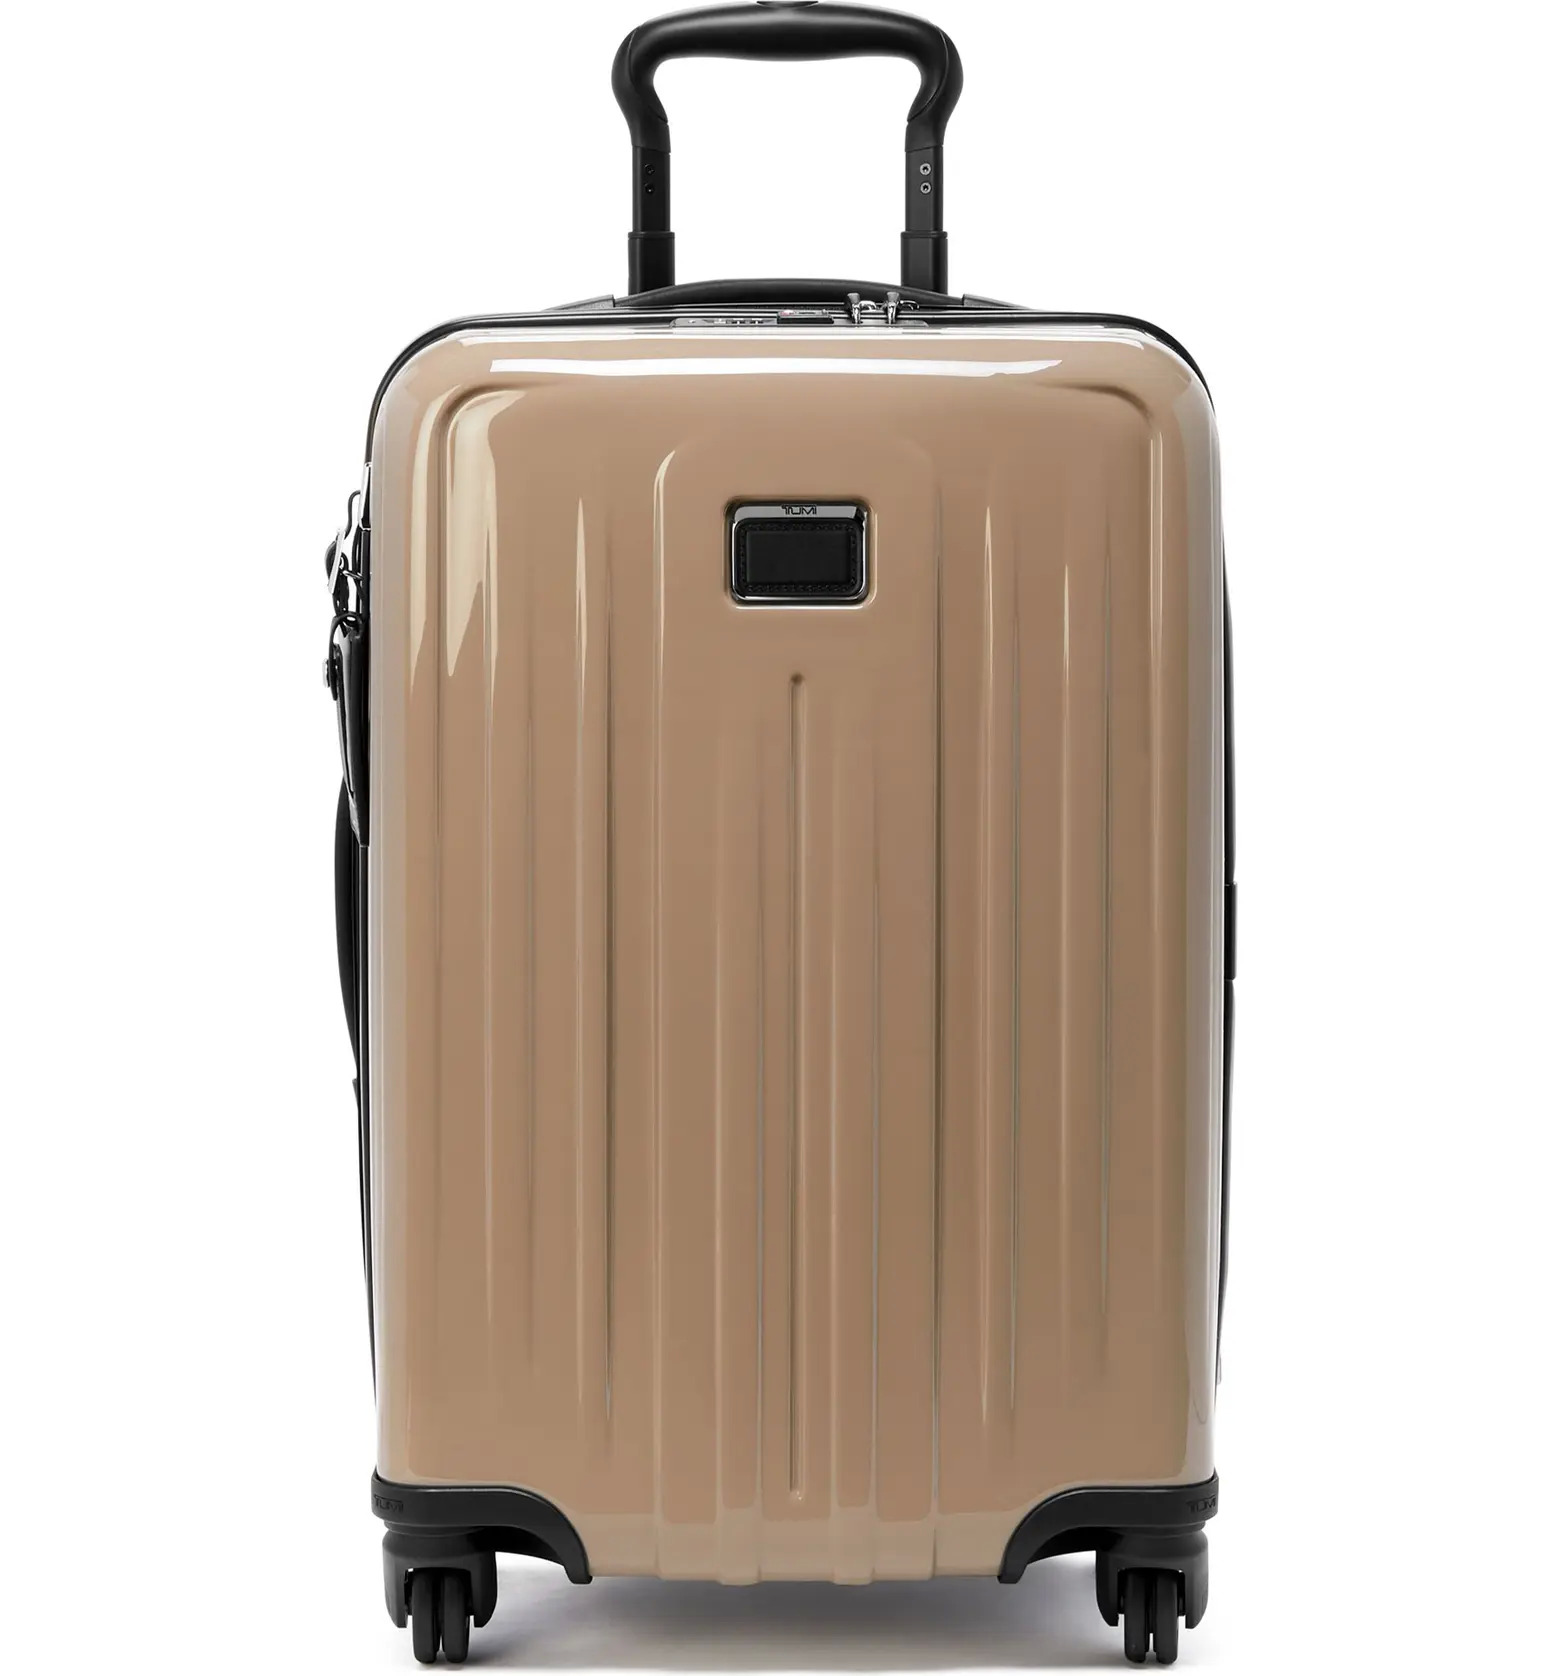 Tumi V4 International 22-Inch Expandable Spinner Carry-On in Khaki $416.97 + Free Shipping